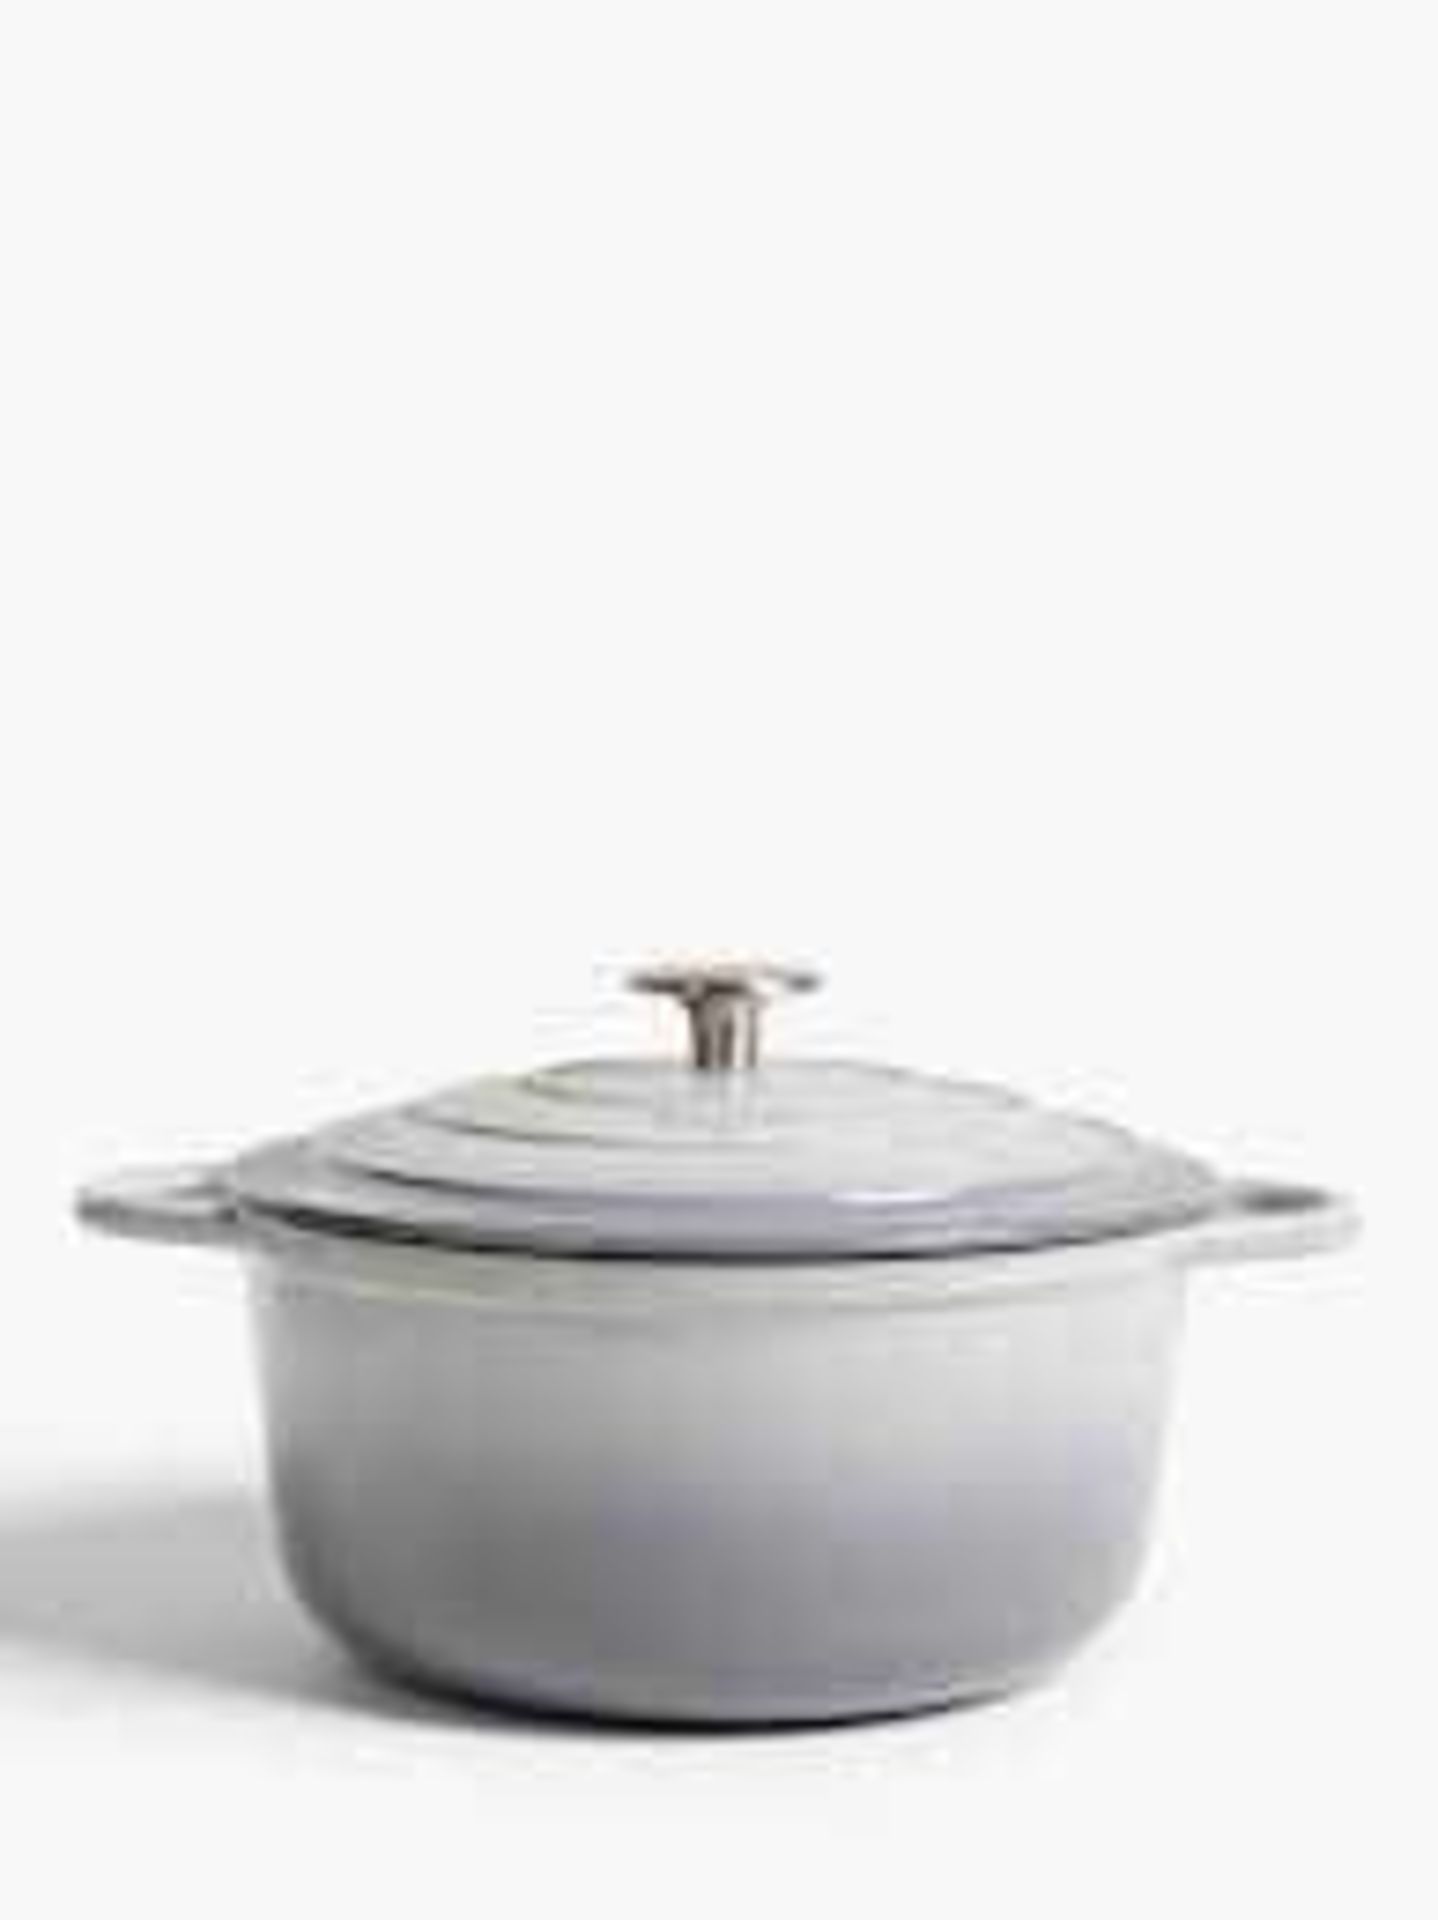 Combined RRP £110 Not Contain Assorted John Lewis Casserole Dishes To Include Boxed 24Cm Cast Iron - Image 2 of 2